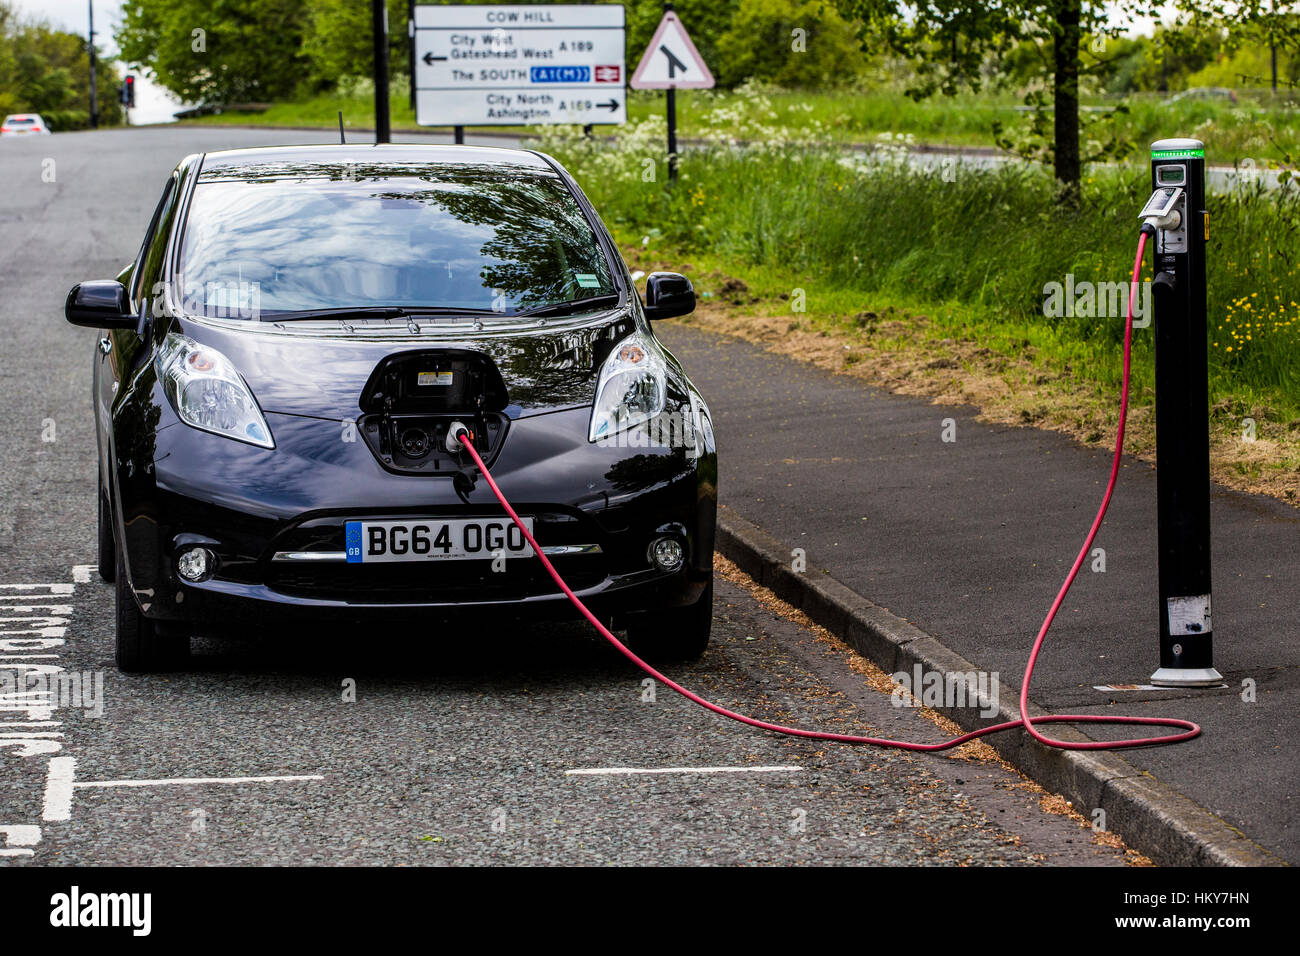 Electric Car Charging. Nissan Leaf car parked on the roadside charging from a a public charging point. Stock Photo